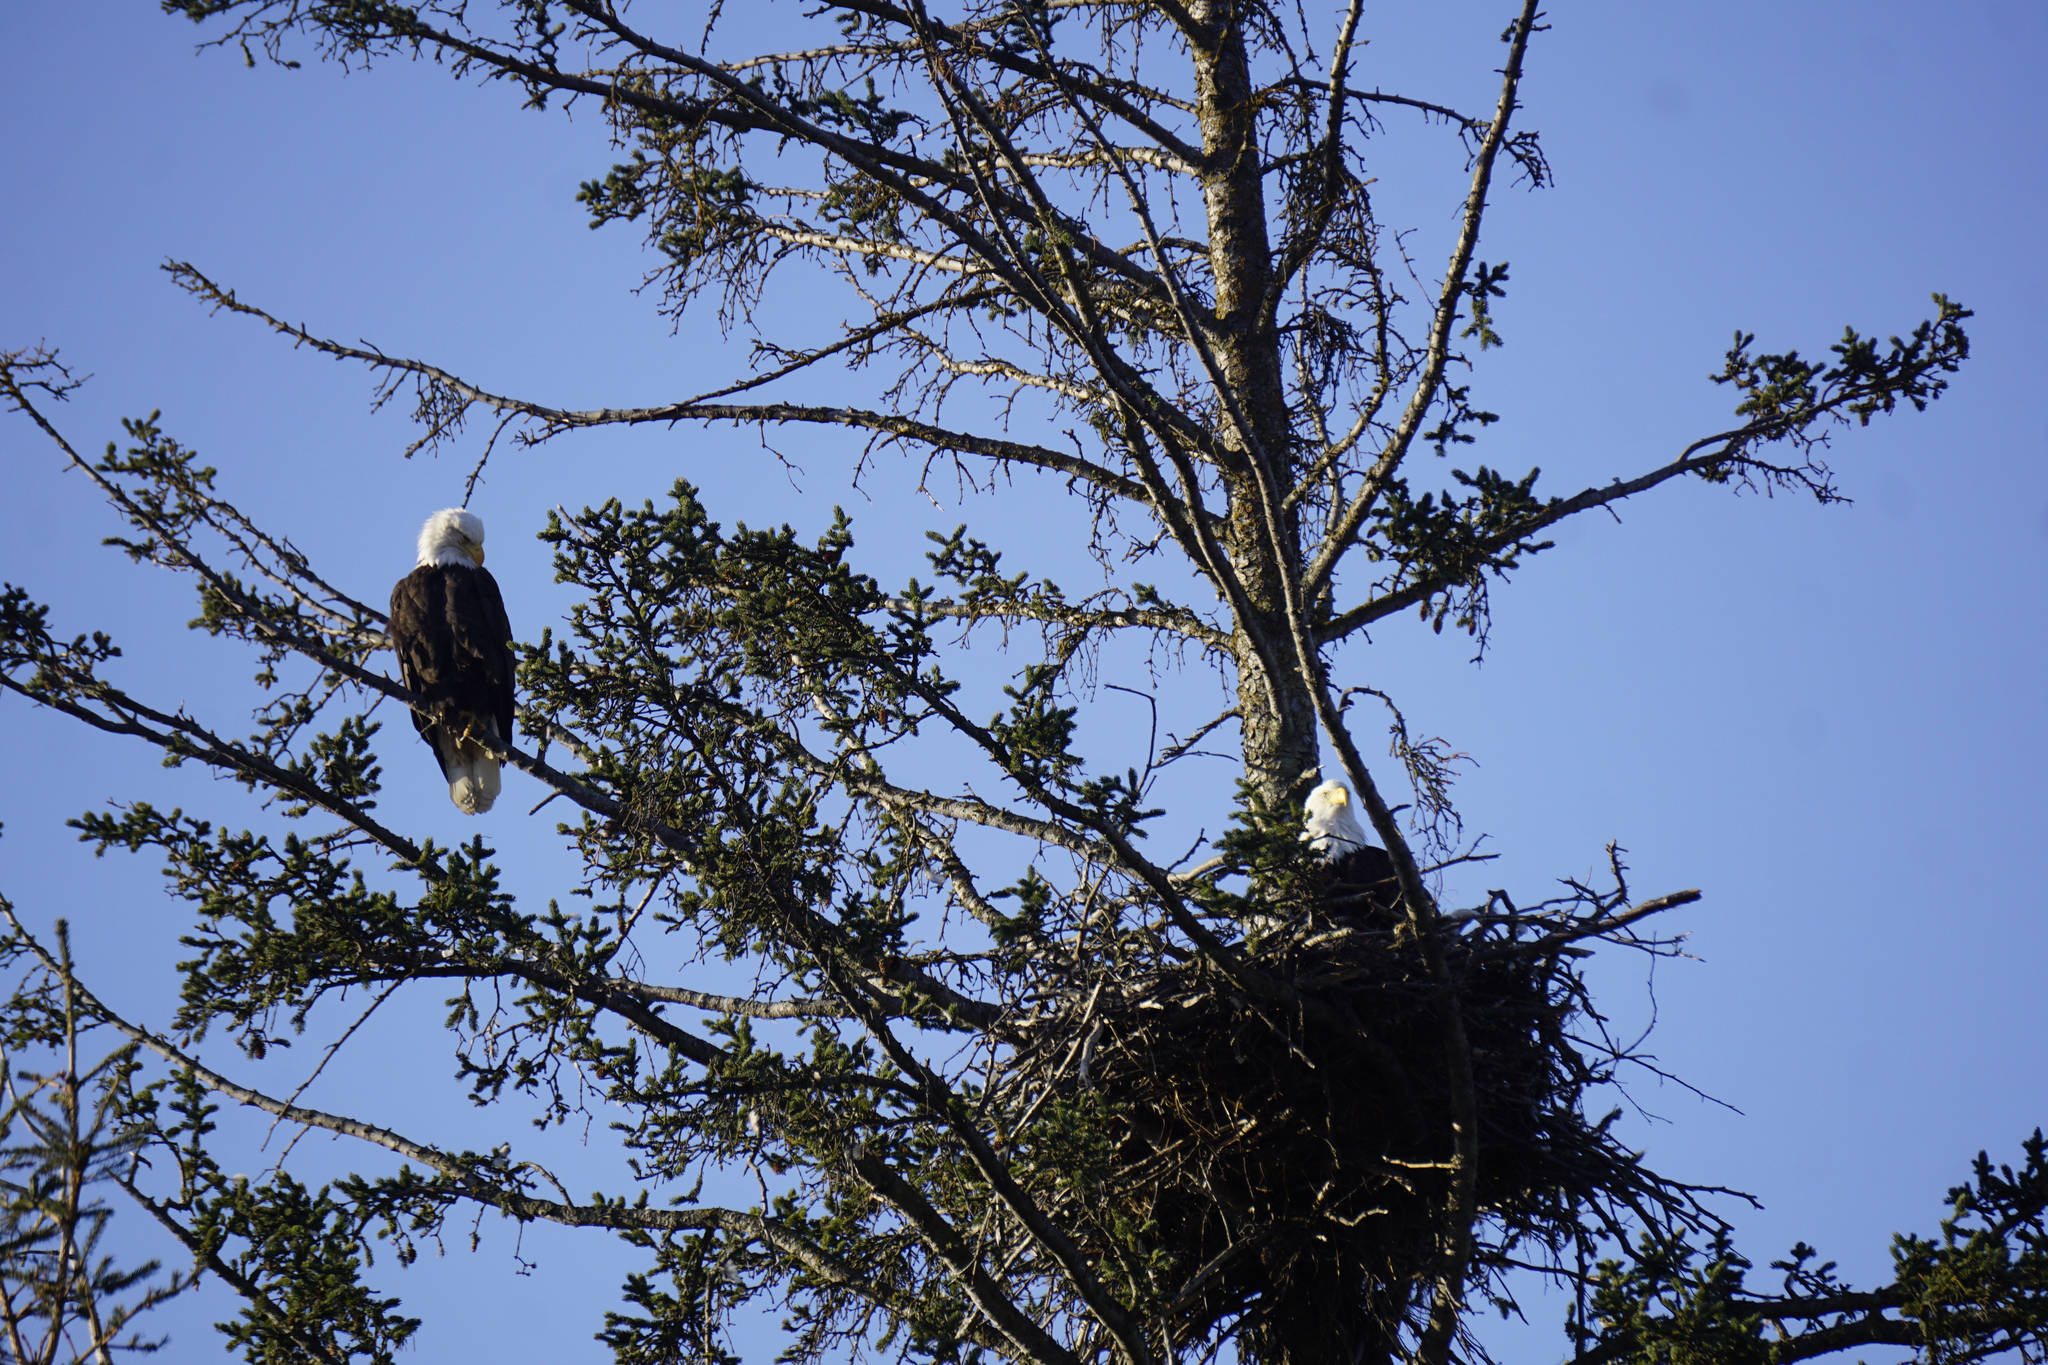 It’s all about the view A bald eagle sits on a tree branch while another eagle watches their nest on Monday morning, April 2, near the Lake Street and Homer Bypass intersection. Since 2010, a pair of bald eagles has built four nests in the area near Beluga Slough south of the Lake Street and Sterling Highway intersection. This pair returned to the nest earlier in March. The first nest was destroyed when the tree fell down in a winter storm. In 2012 the eagles built a new nest across from the Homer Post Office by the motorhome dump station. In 2014 they built another nest in a new tree closer to the slough. In 2016 they built another nest, but in 2017 moved to the post office location. This nest is the same one built in 2016. (Photo by Michael Armstrong, Homer News)